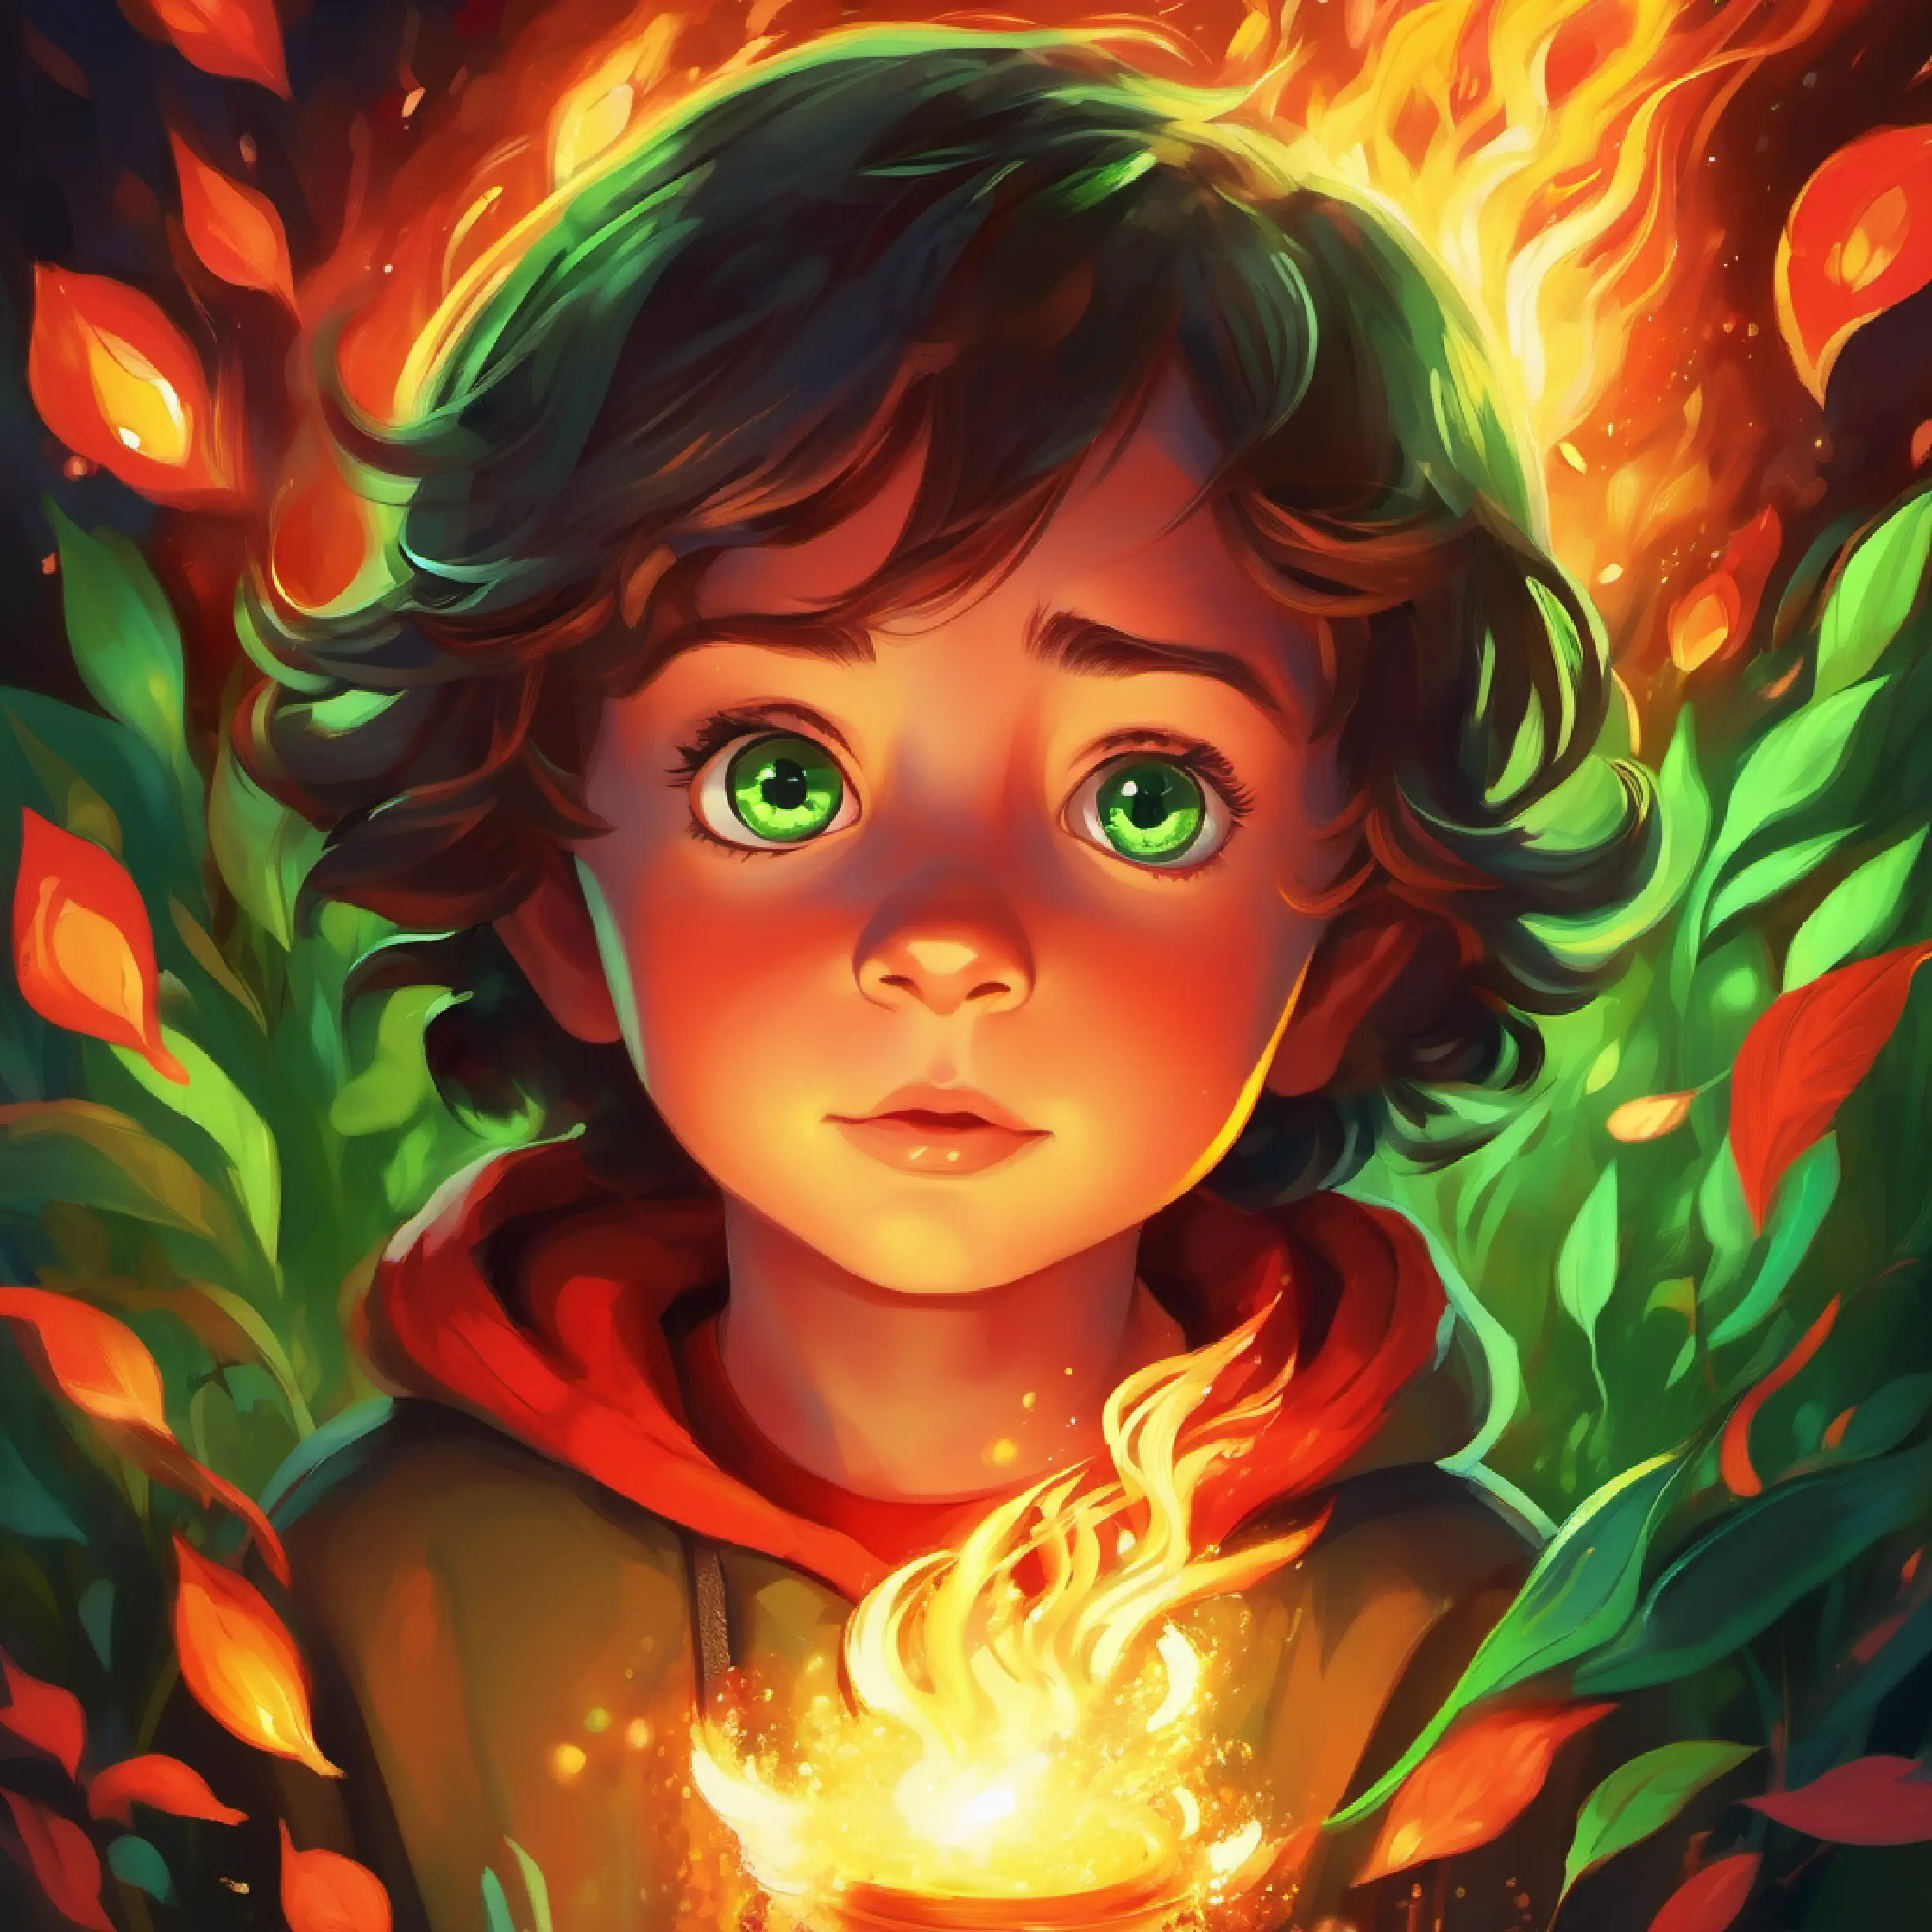 Curious child with sparkly green eyes and an eager glow's questions overwhelm Fiery, mad child with bright red eyes and a flaming glow, Curious child with sparkly green eyes and an eager glow leaves.